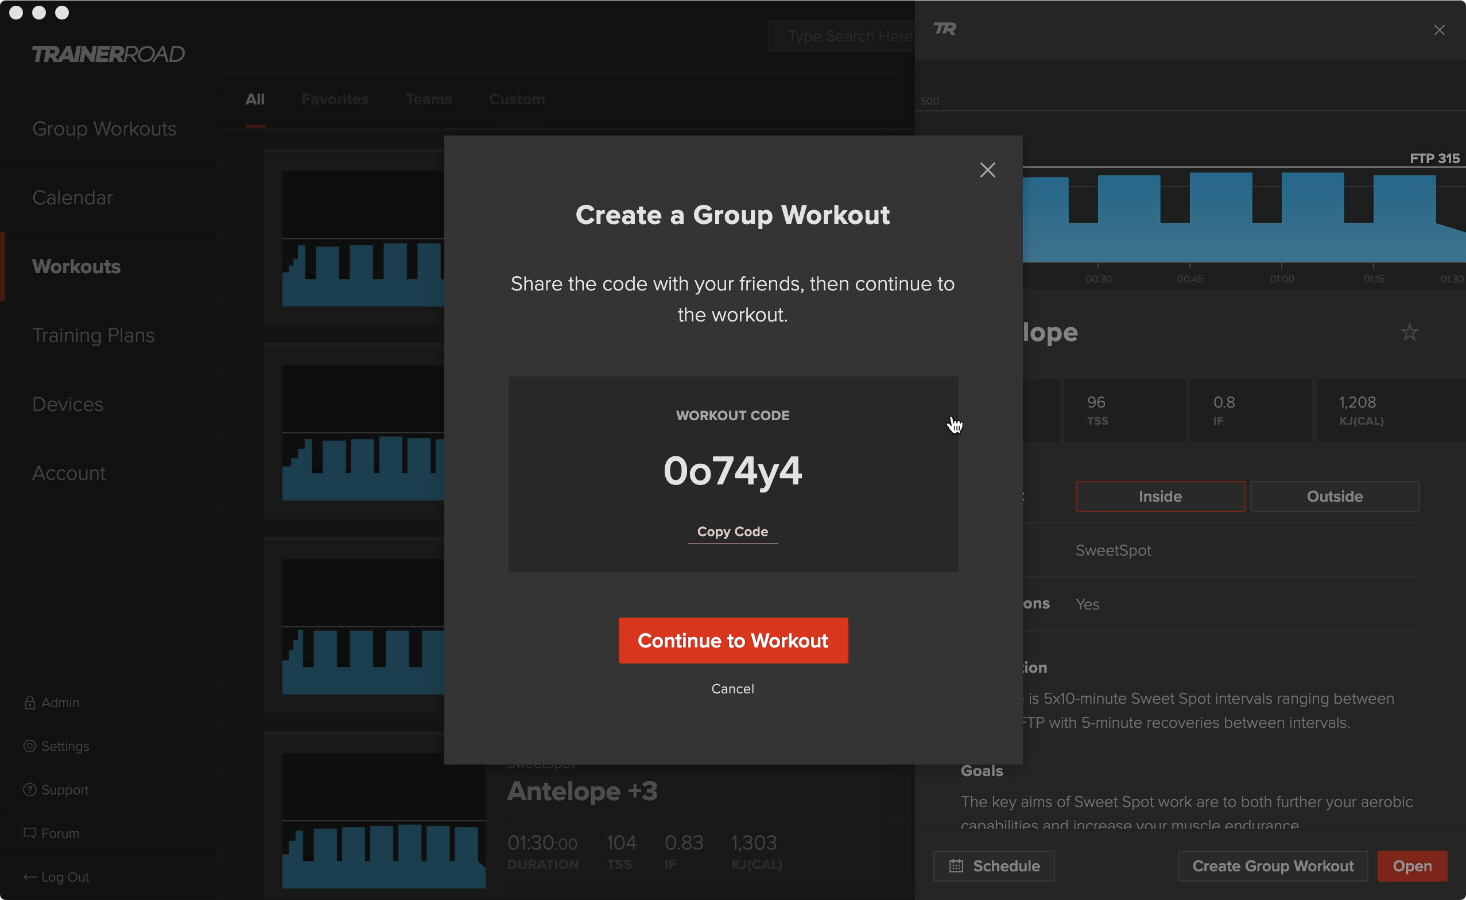 TrainerRoad Group Workouts, virtual indoor group training rides for up to 5 riders, train better together, social distancing rides